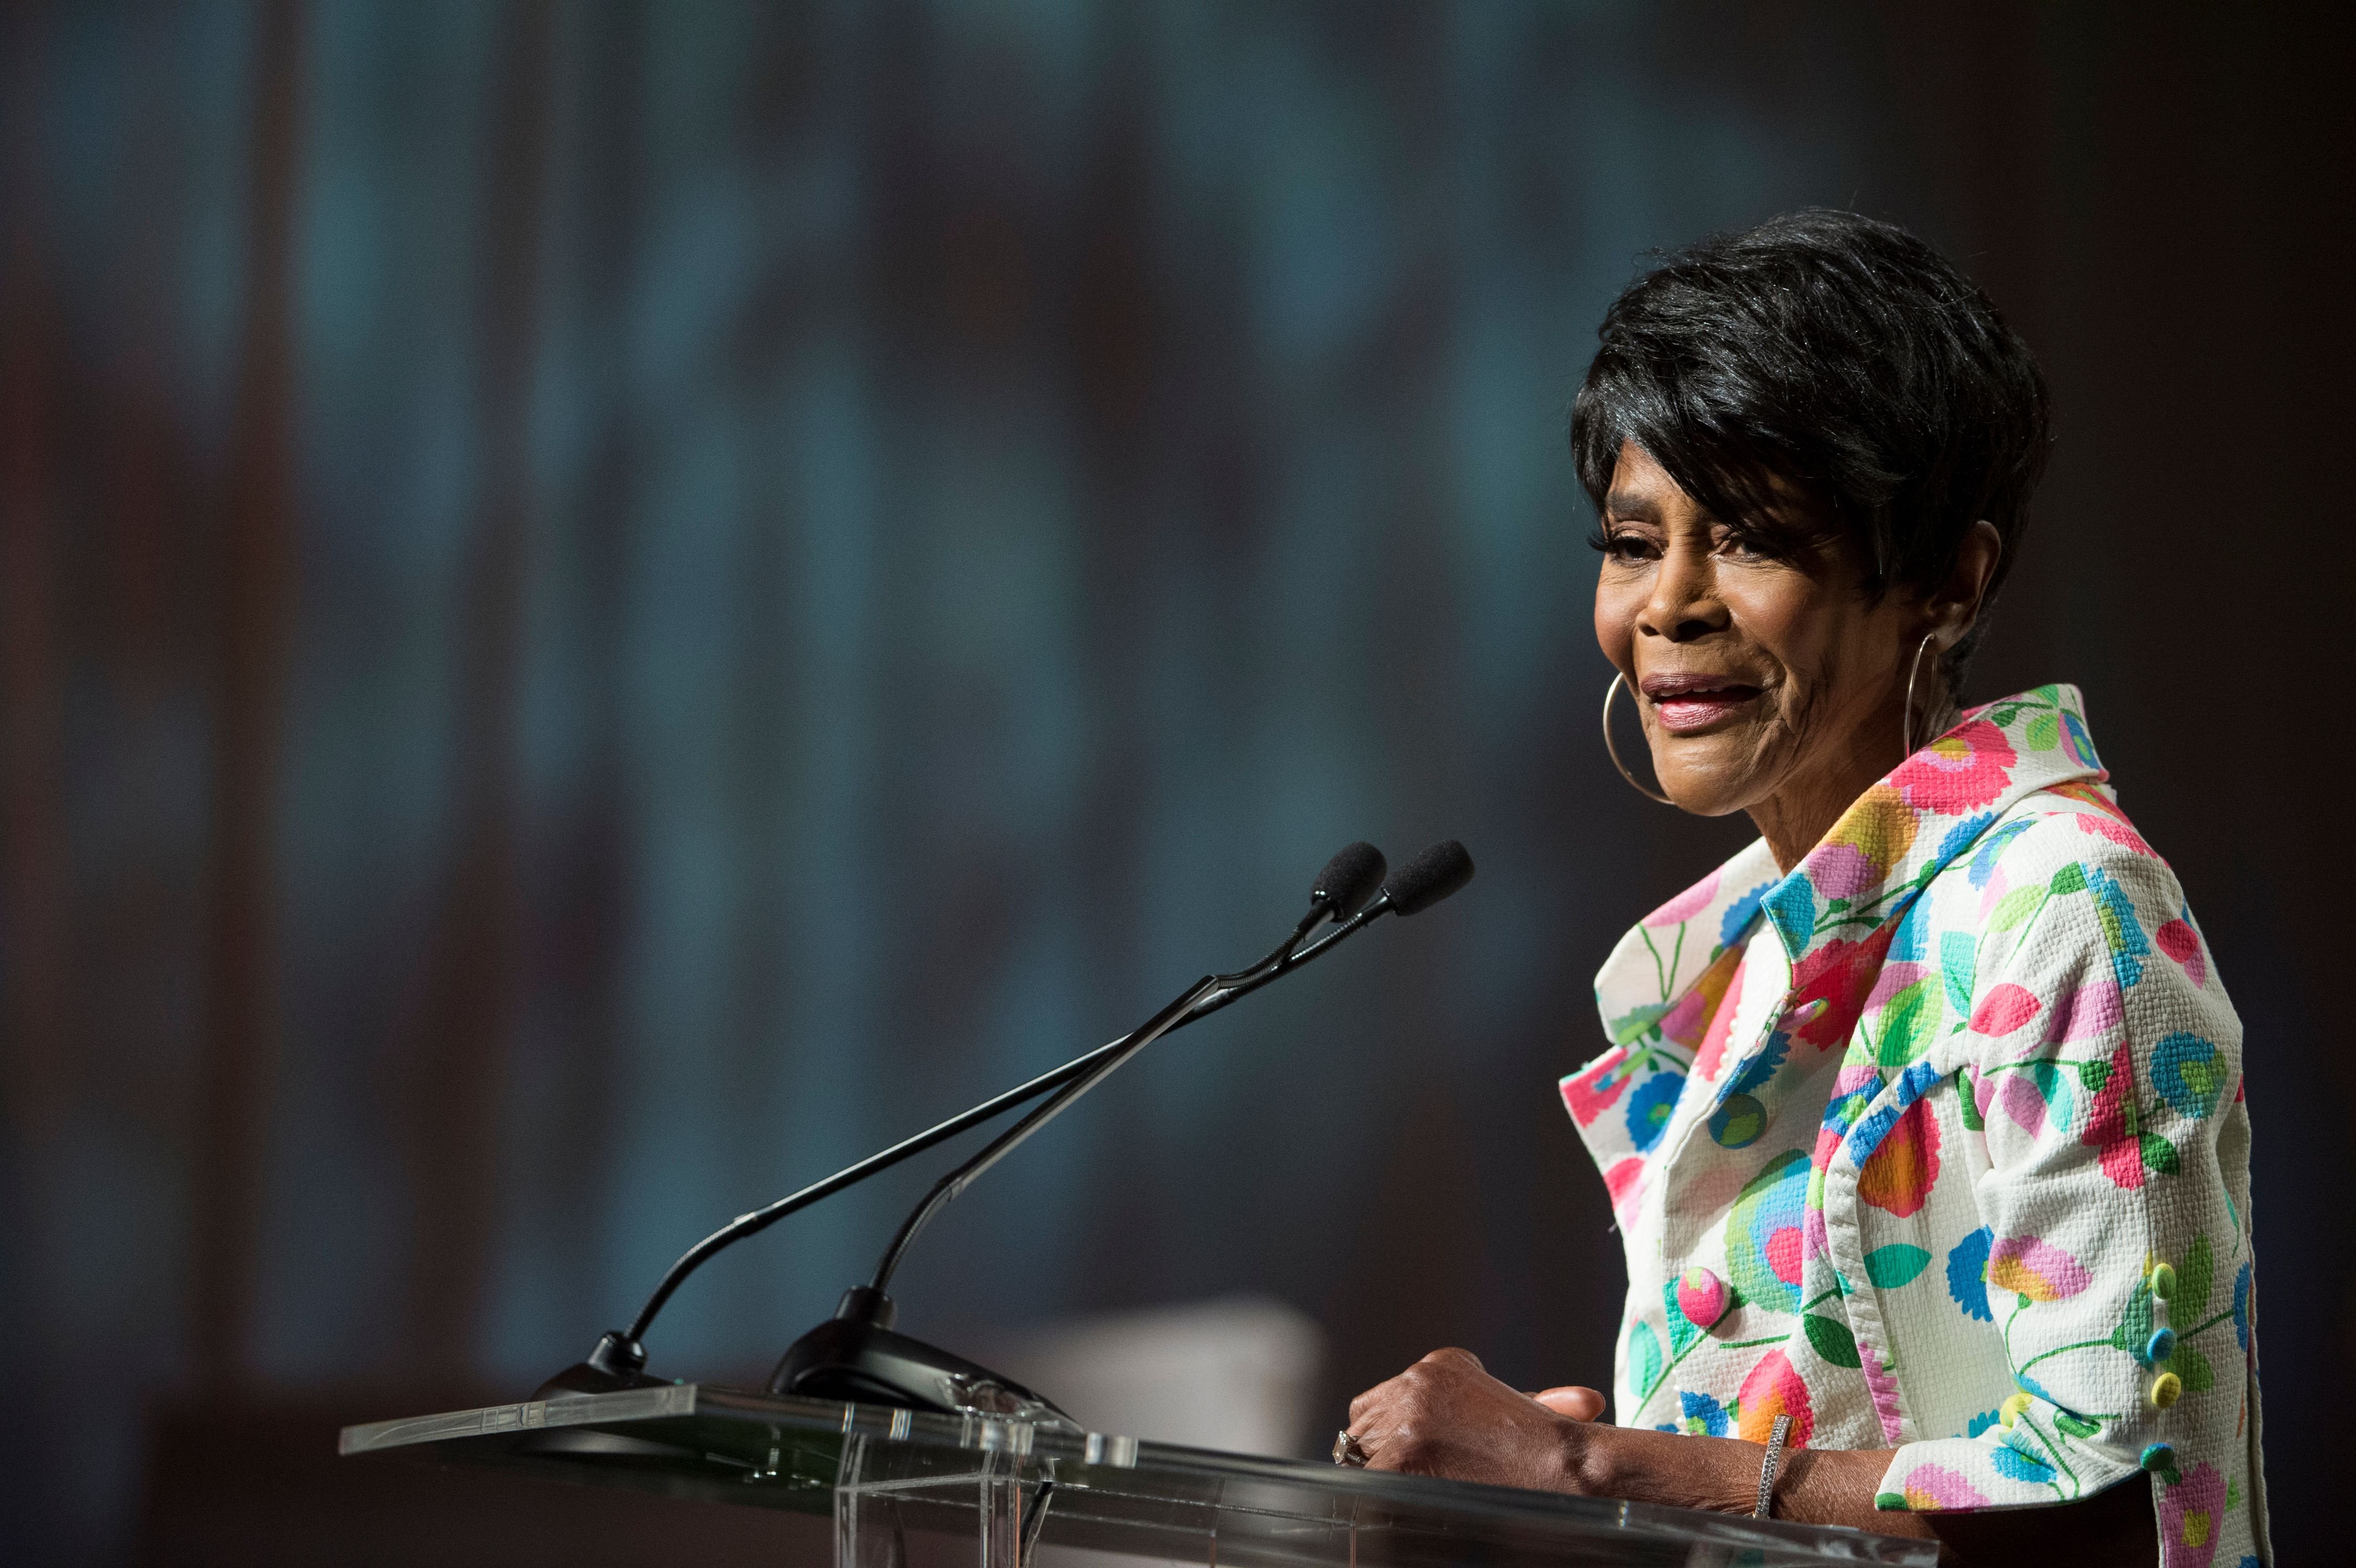 Cicely Tyson receives the Legends Award at MegaFest's International Faith & Family Film Festival at Omni Hotel on June 30, 2017 | Photo: Getty Images